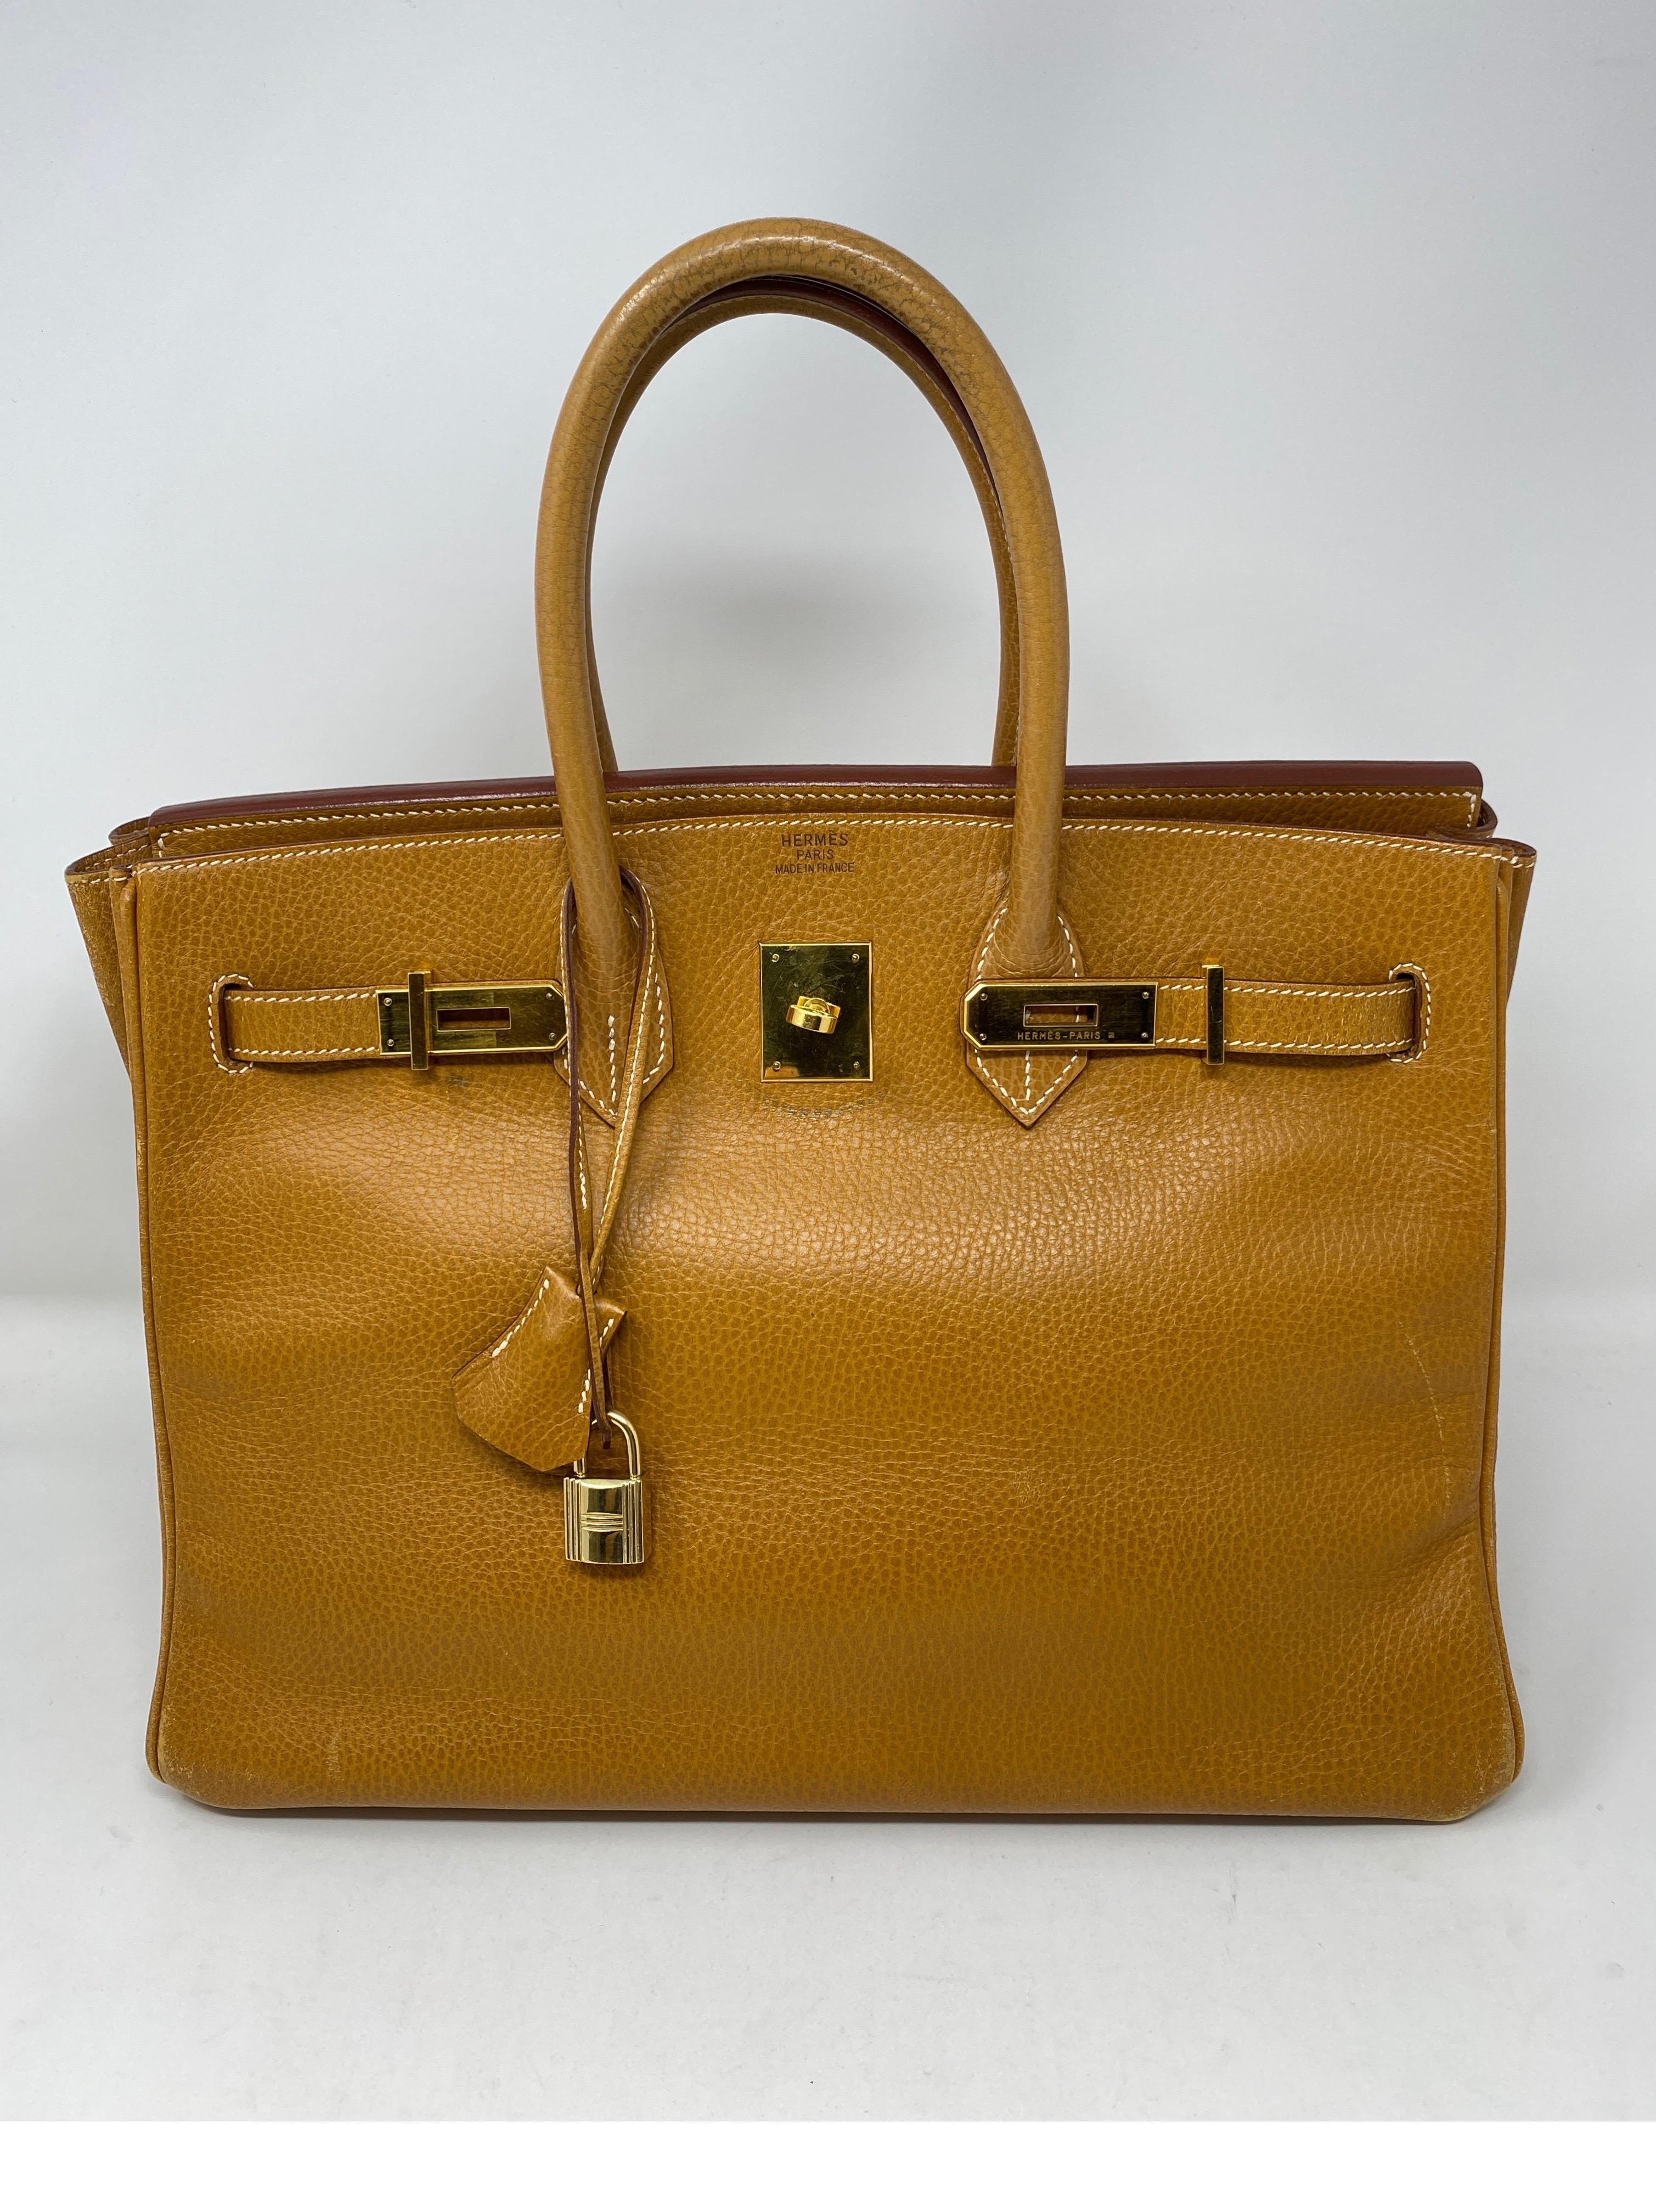 Hermes Natural Birkin 35 Bag. Ardennes leather. Vintage from 2002. Gold plated hardware. F square stamp. Has wear due to age and usage. Still has lots of life left. Light corner wear and light scratches throughout. Looks cool distressed a little.